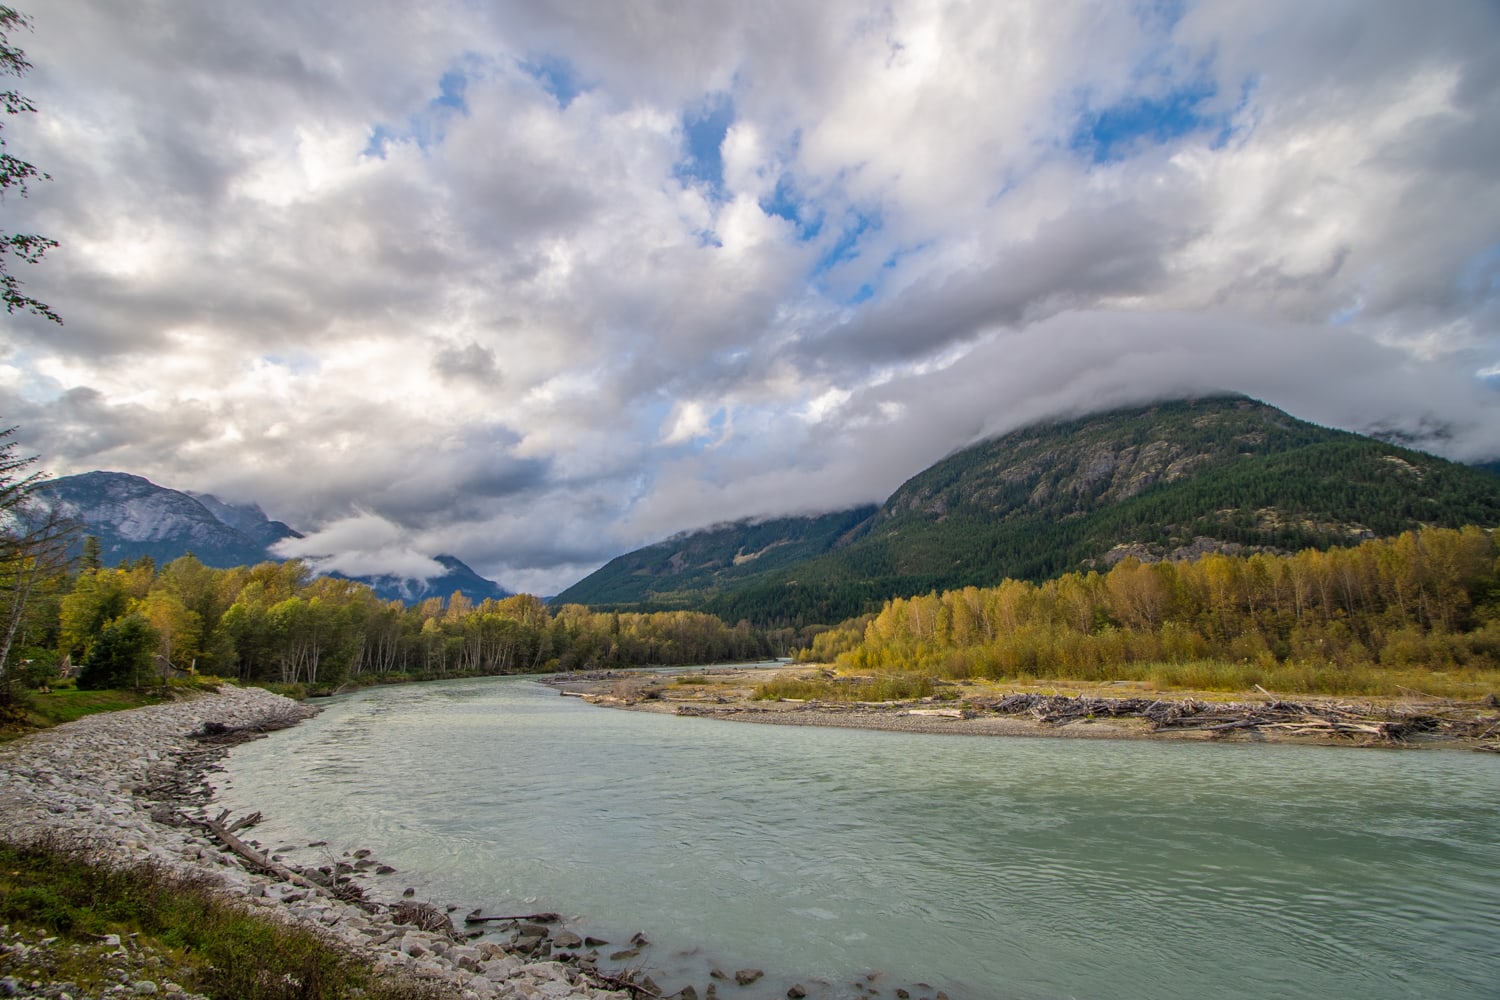 Bella Coola British Columbia: One of the Last Great Wilderness Areas